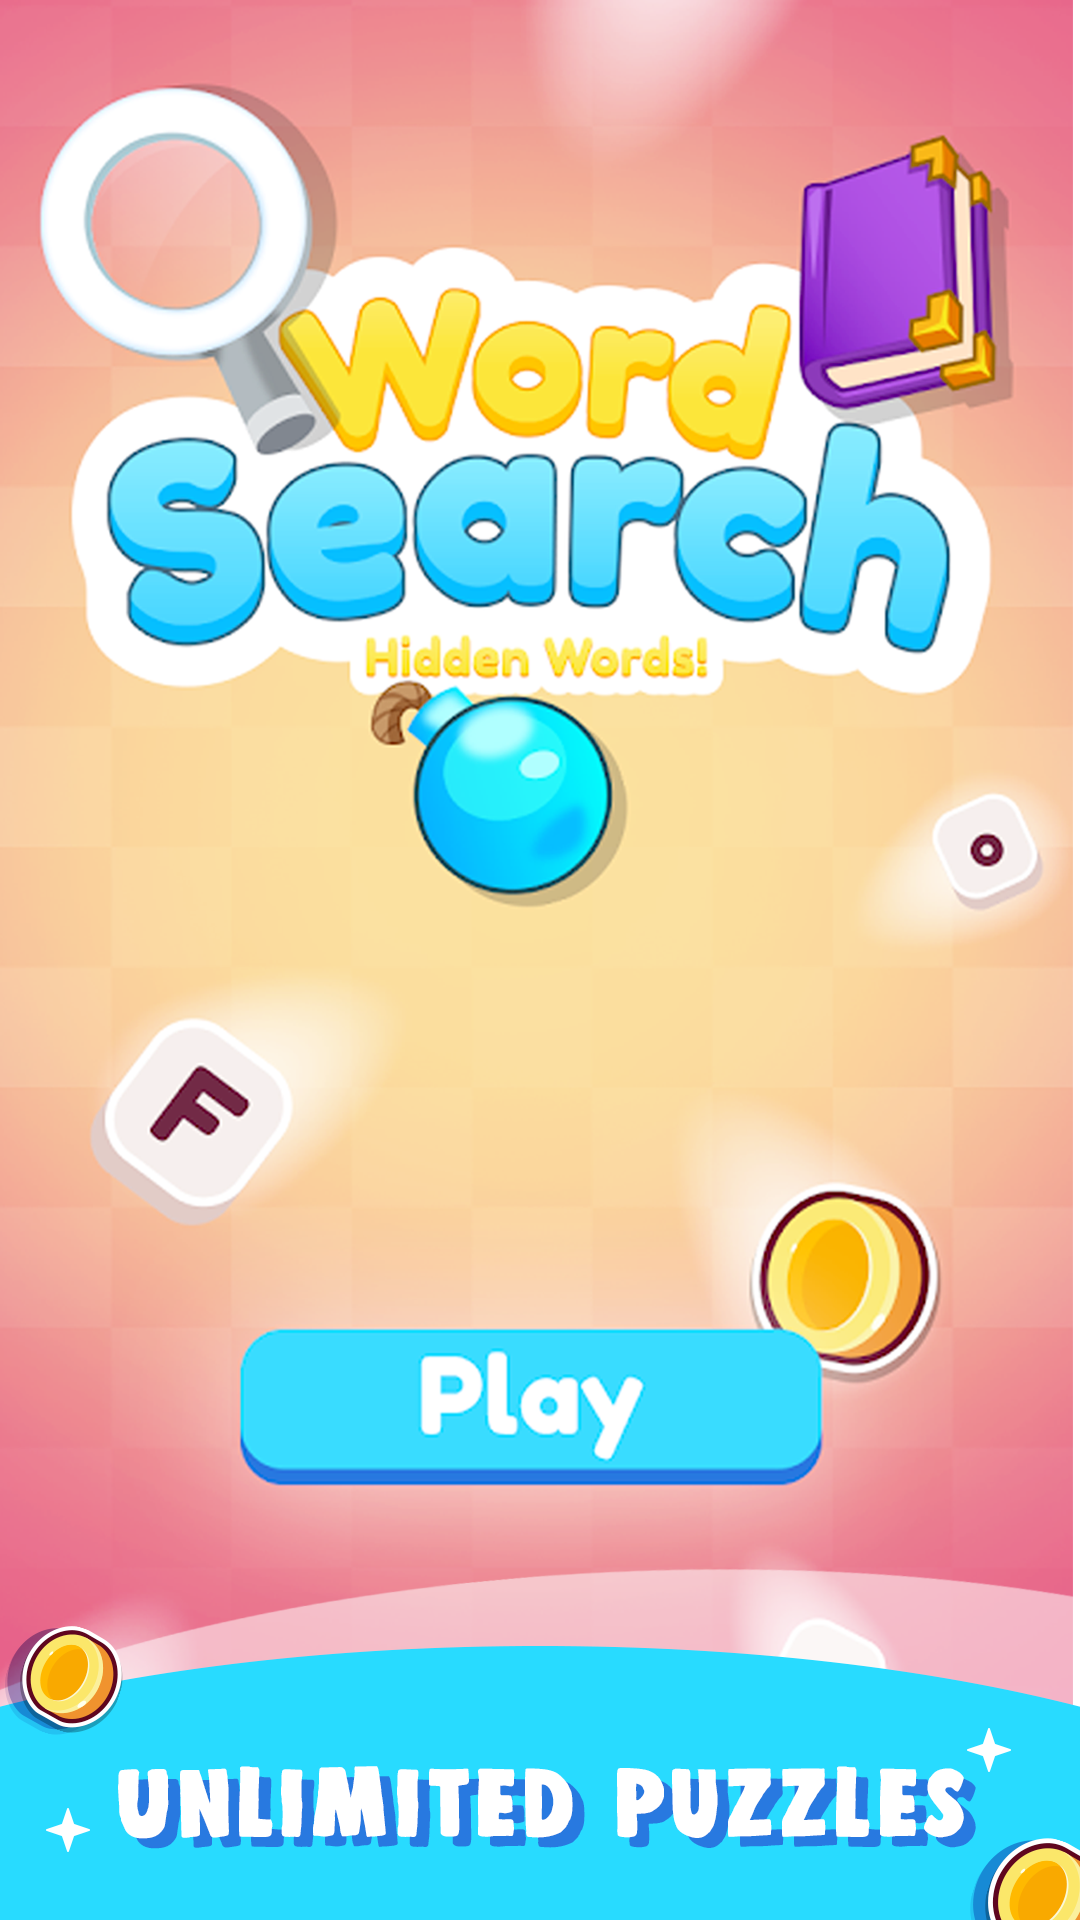 Screenshot 1 of Word Search 2: Advance Hidden Words Puzzle 1.1.0